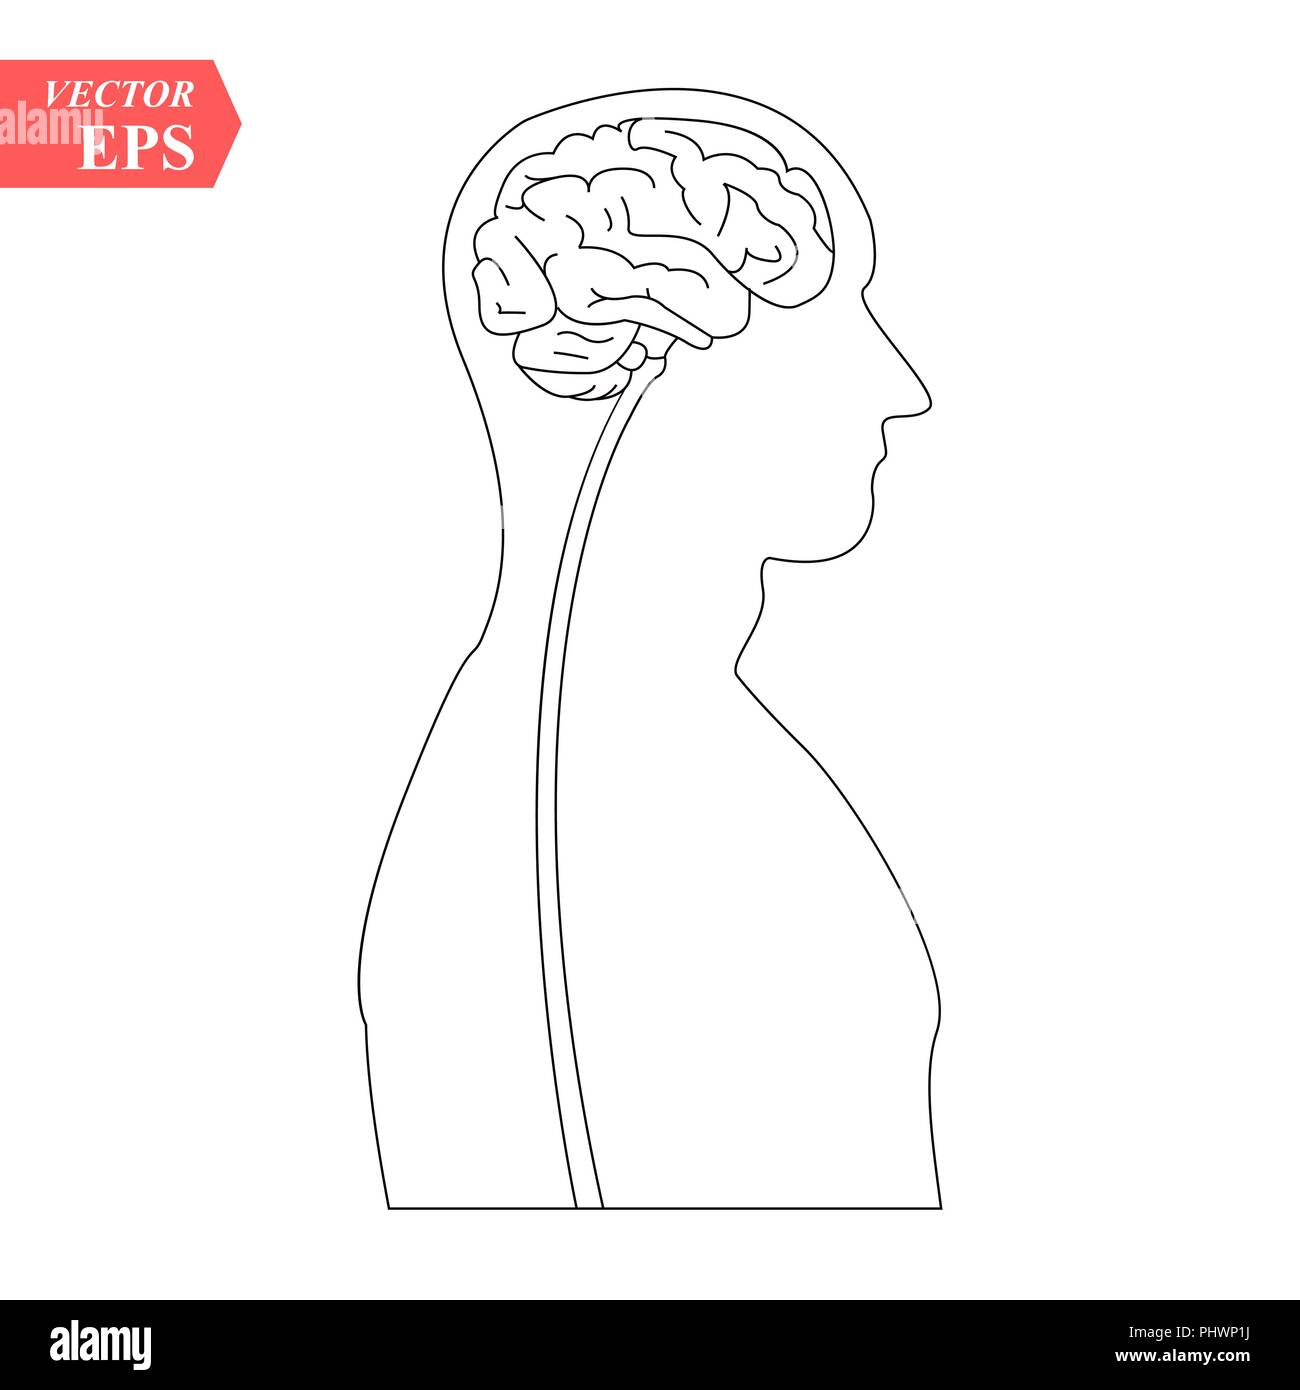 Head with brain vector icon EPS10. Simple isolated silhouette symbol. Stock Vector